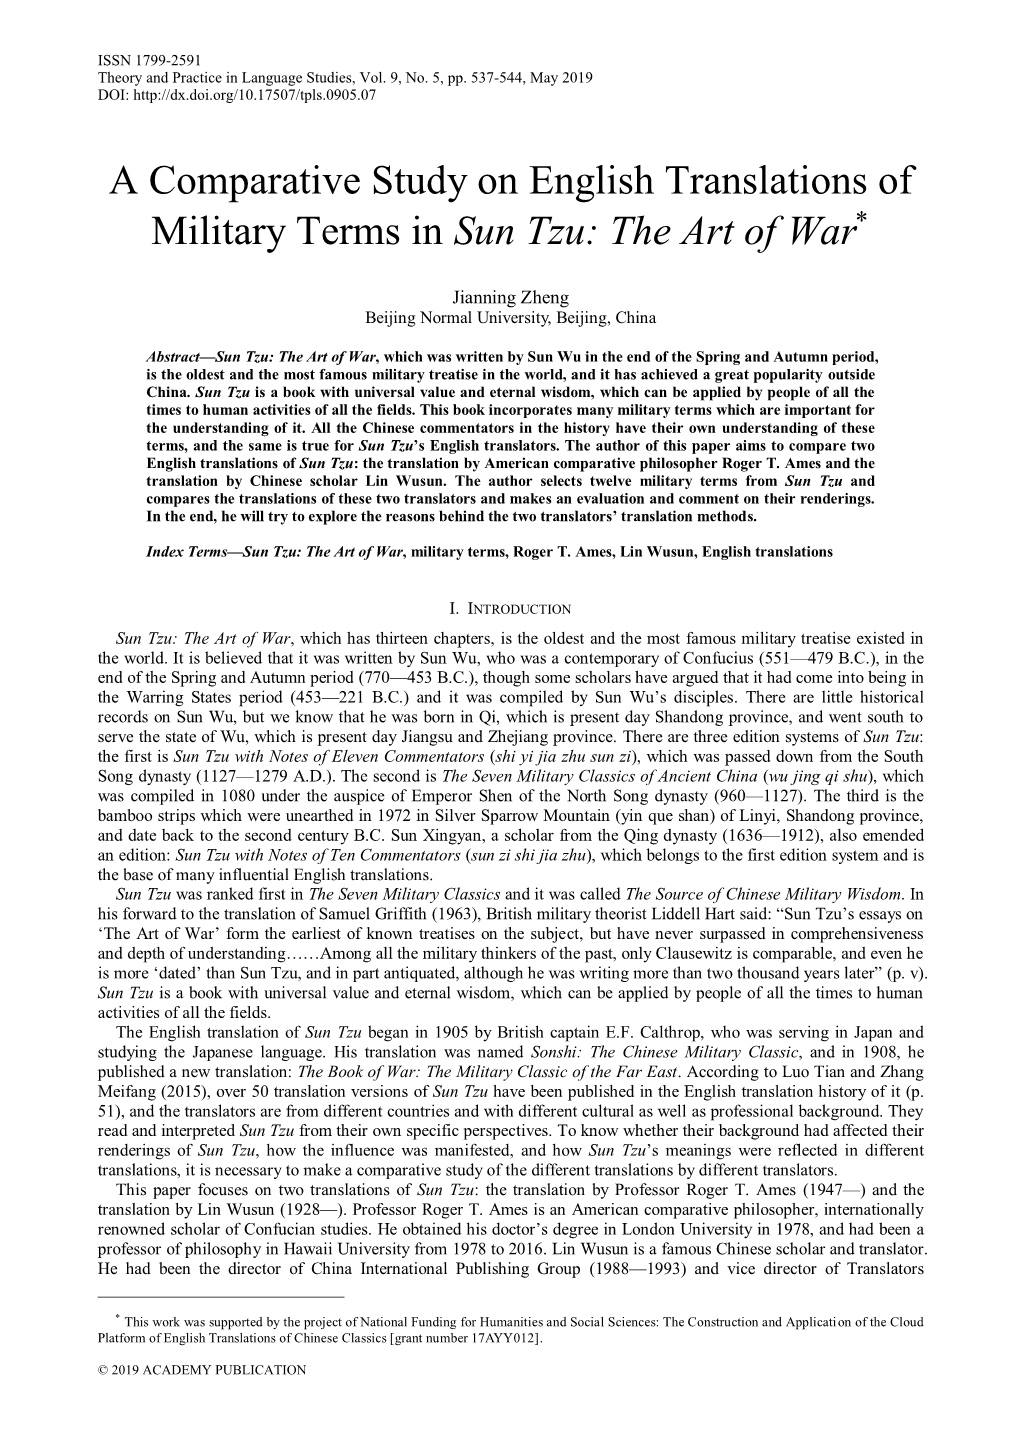 A Comparative Study on English Translations of Military Terms in Sun Tzu: the Art of War